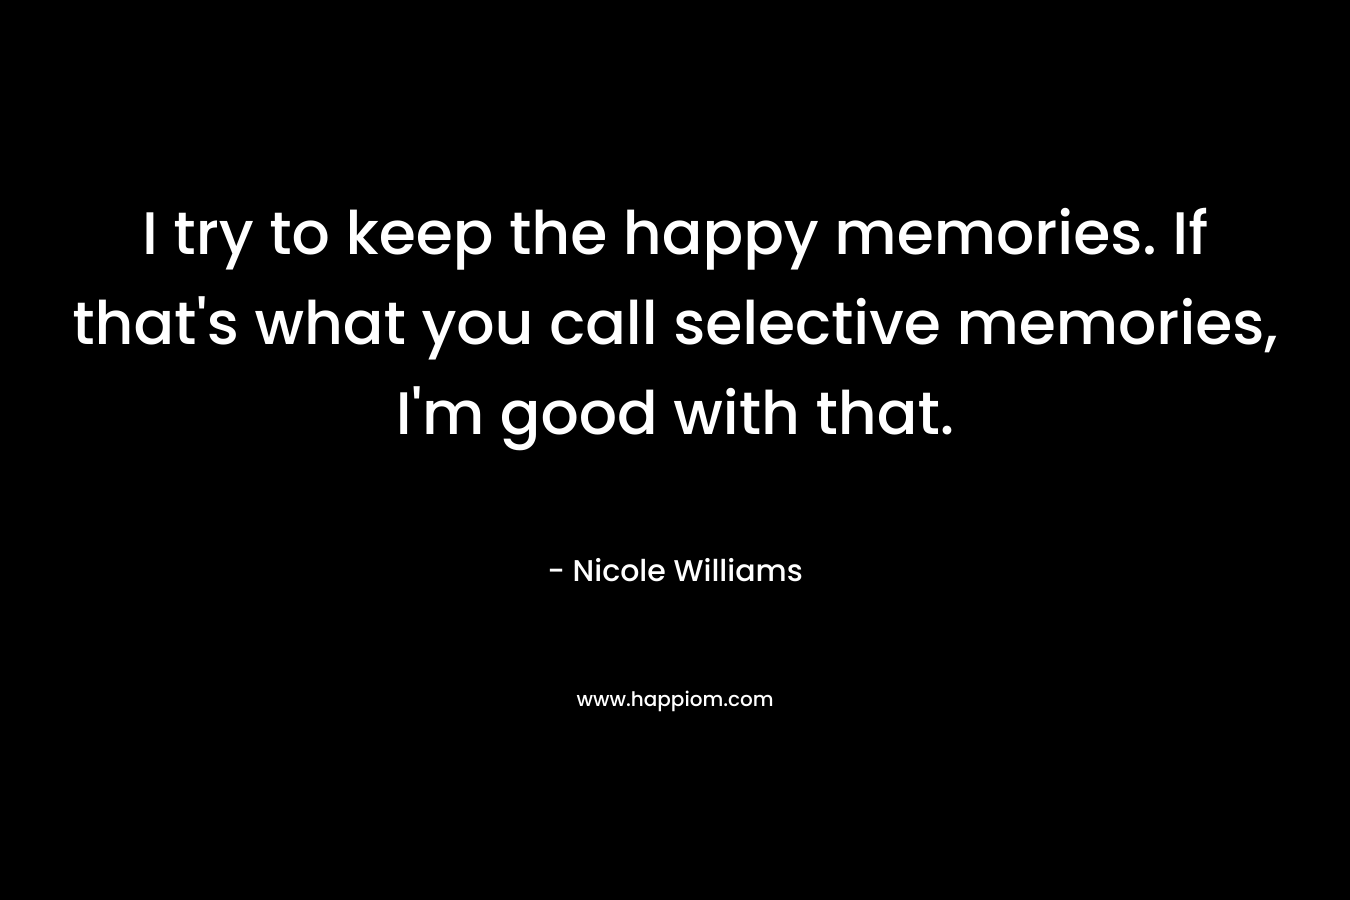 I try to keep the happy memories. If that's what you call selective memories, I'm good with that.